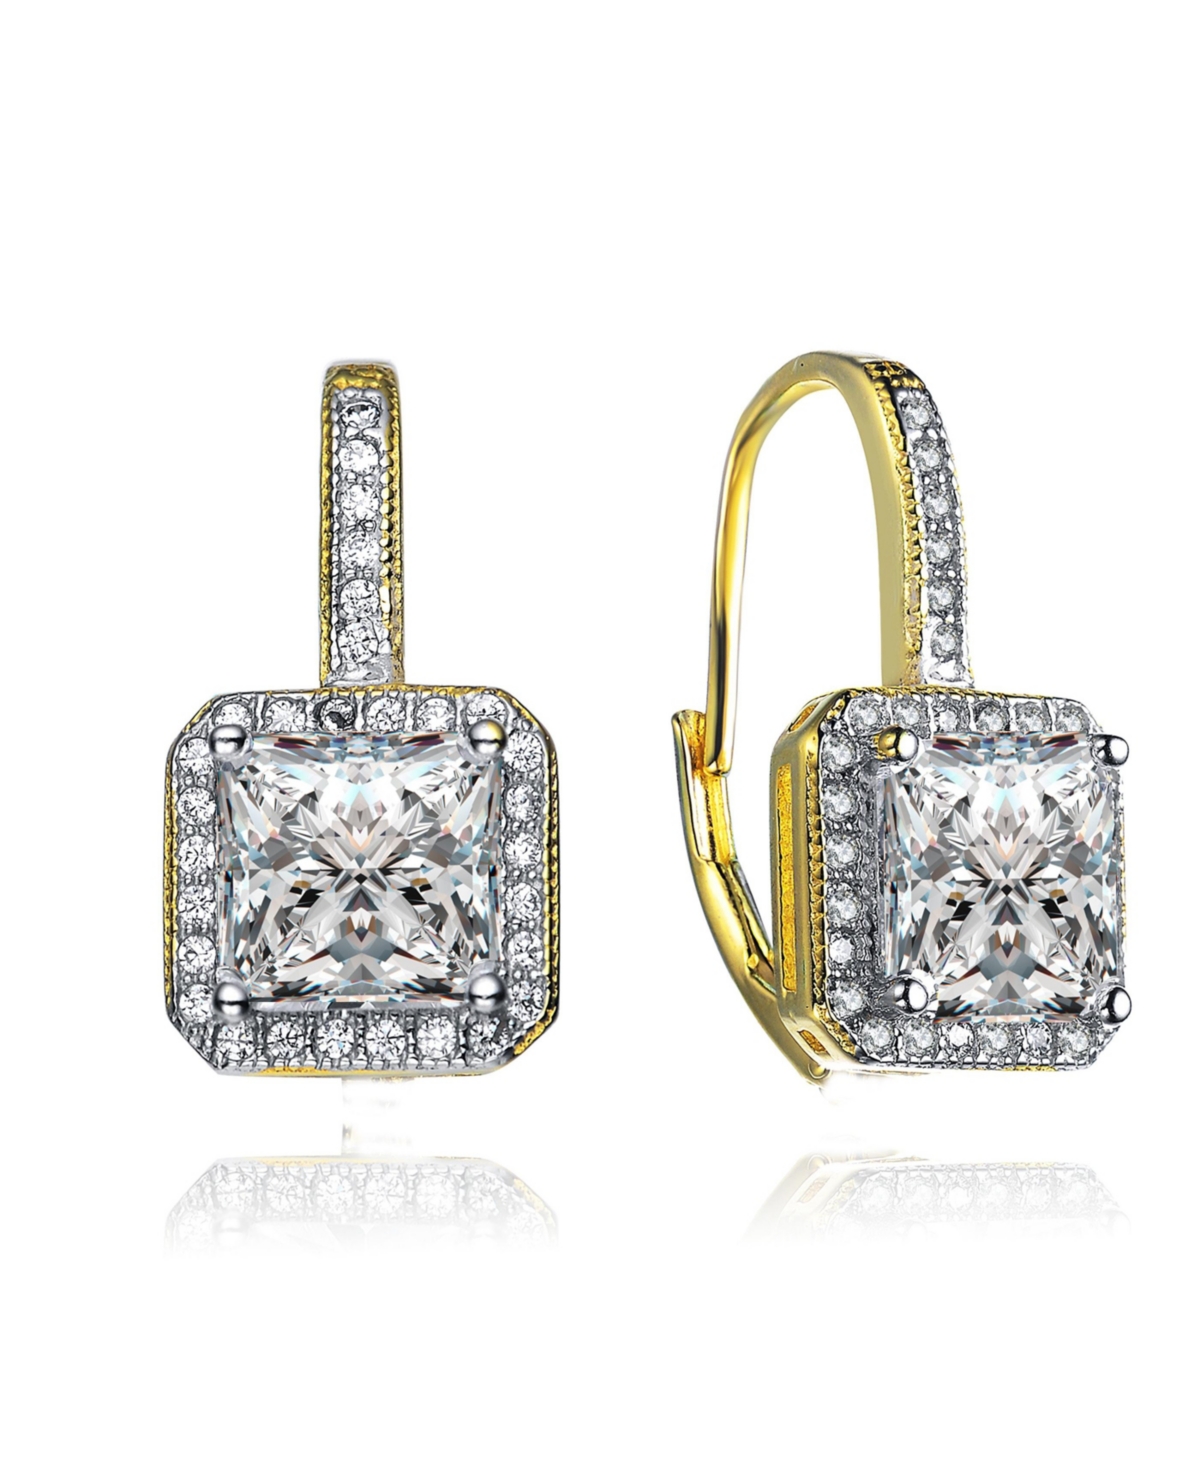 Radiant 14K Gold-Plated Halo Leverback Earrings with Cubic Zirconia - Gold